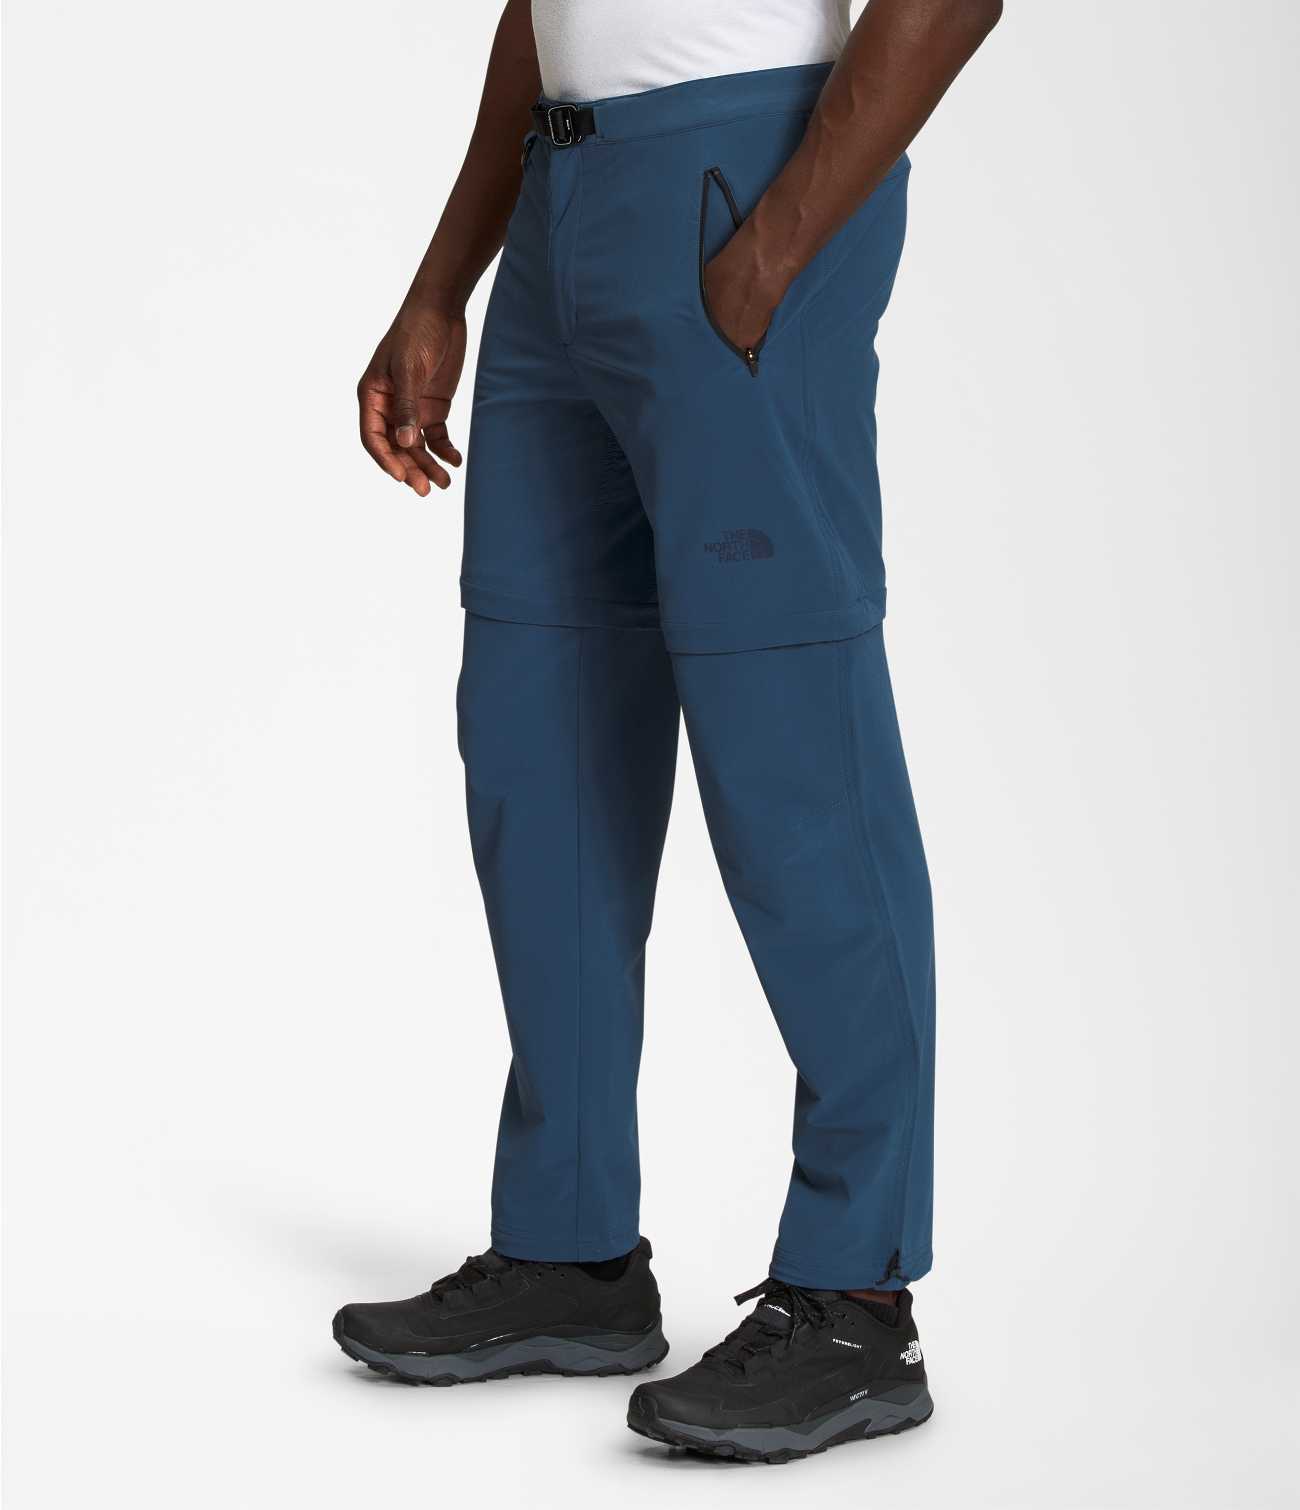 MEN'S PARAMOUNT PRO CONVERTIBLE PANT, The North Face